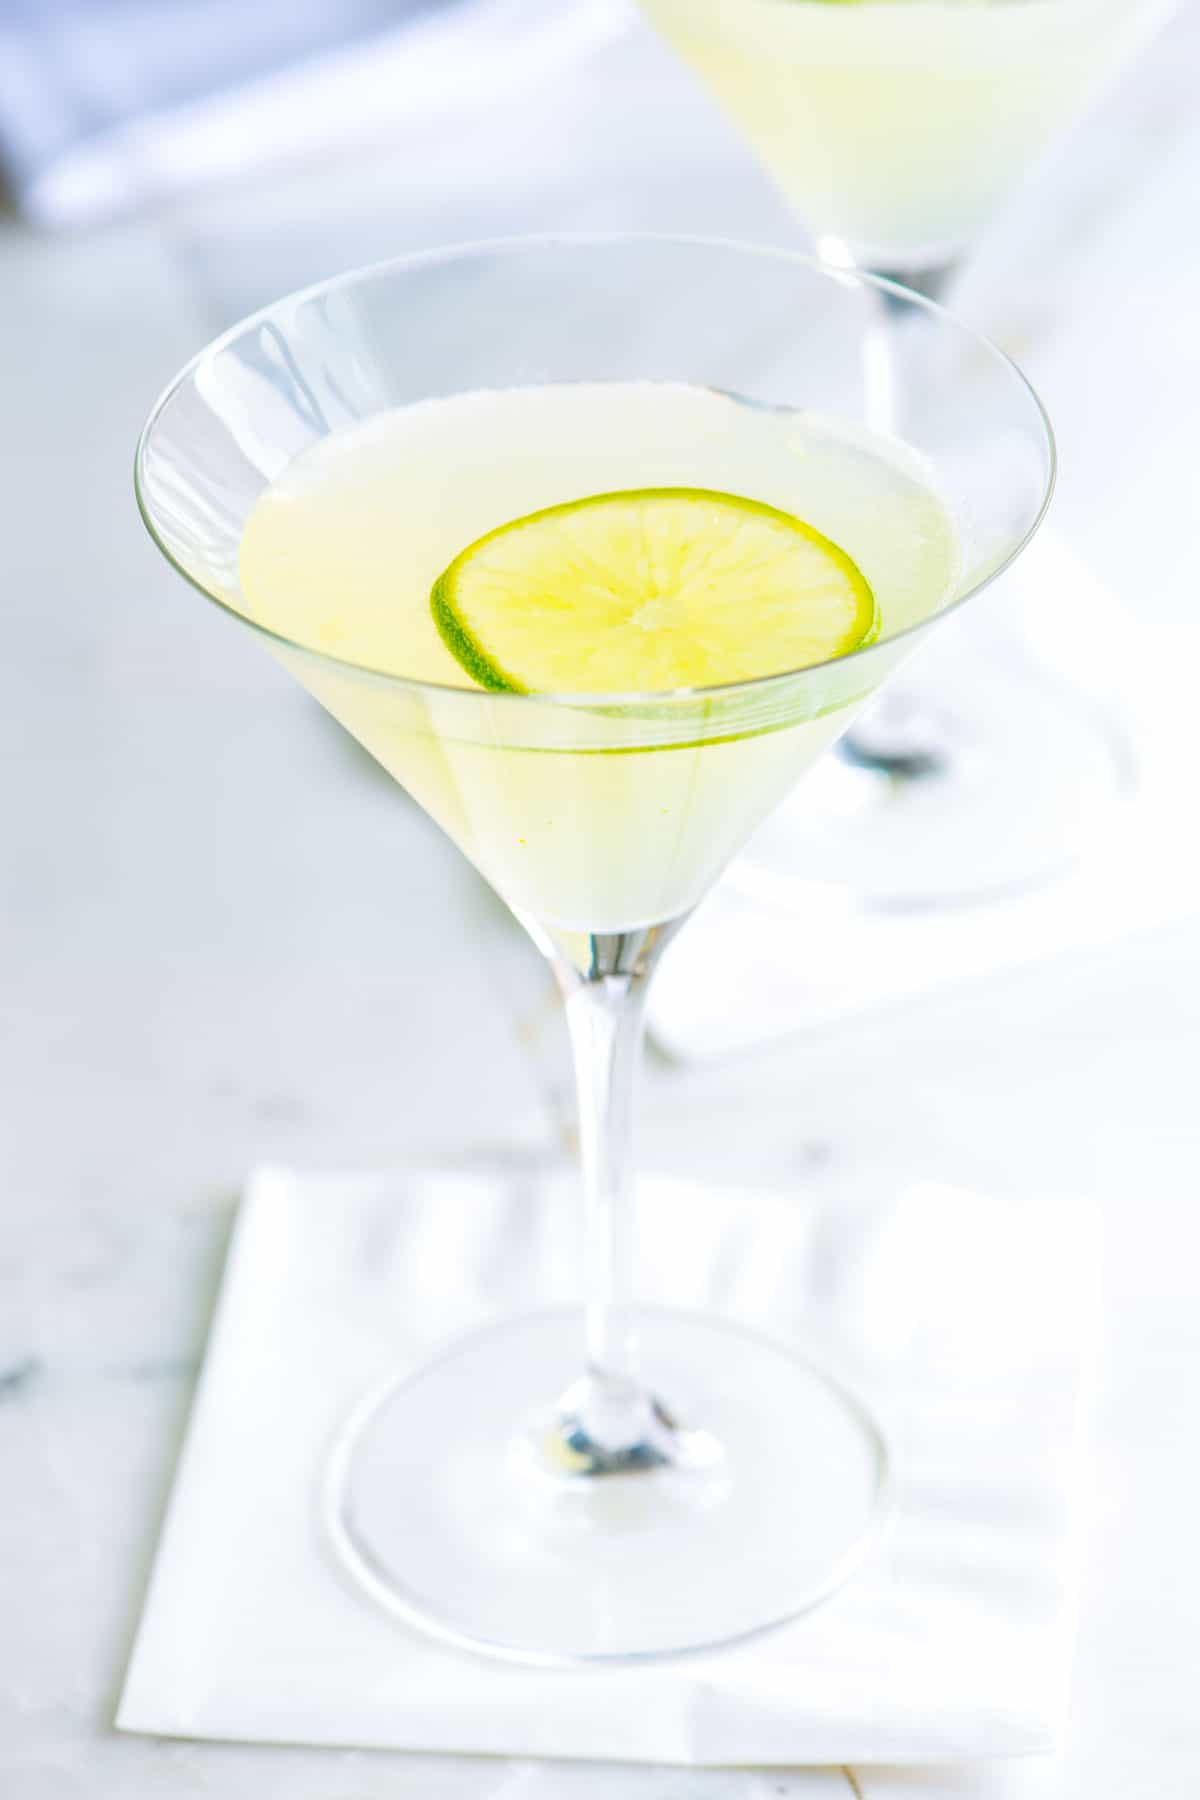 How to Make a Vodka Gimlet From Scratch